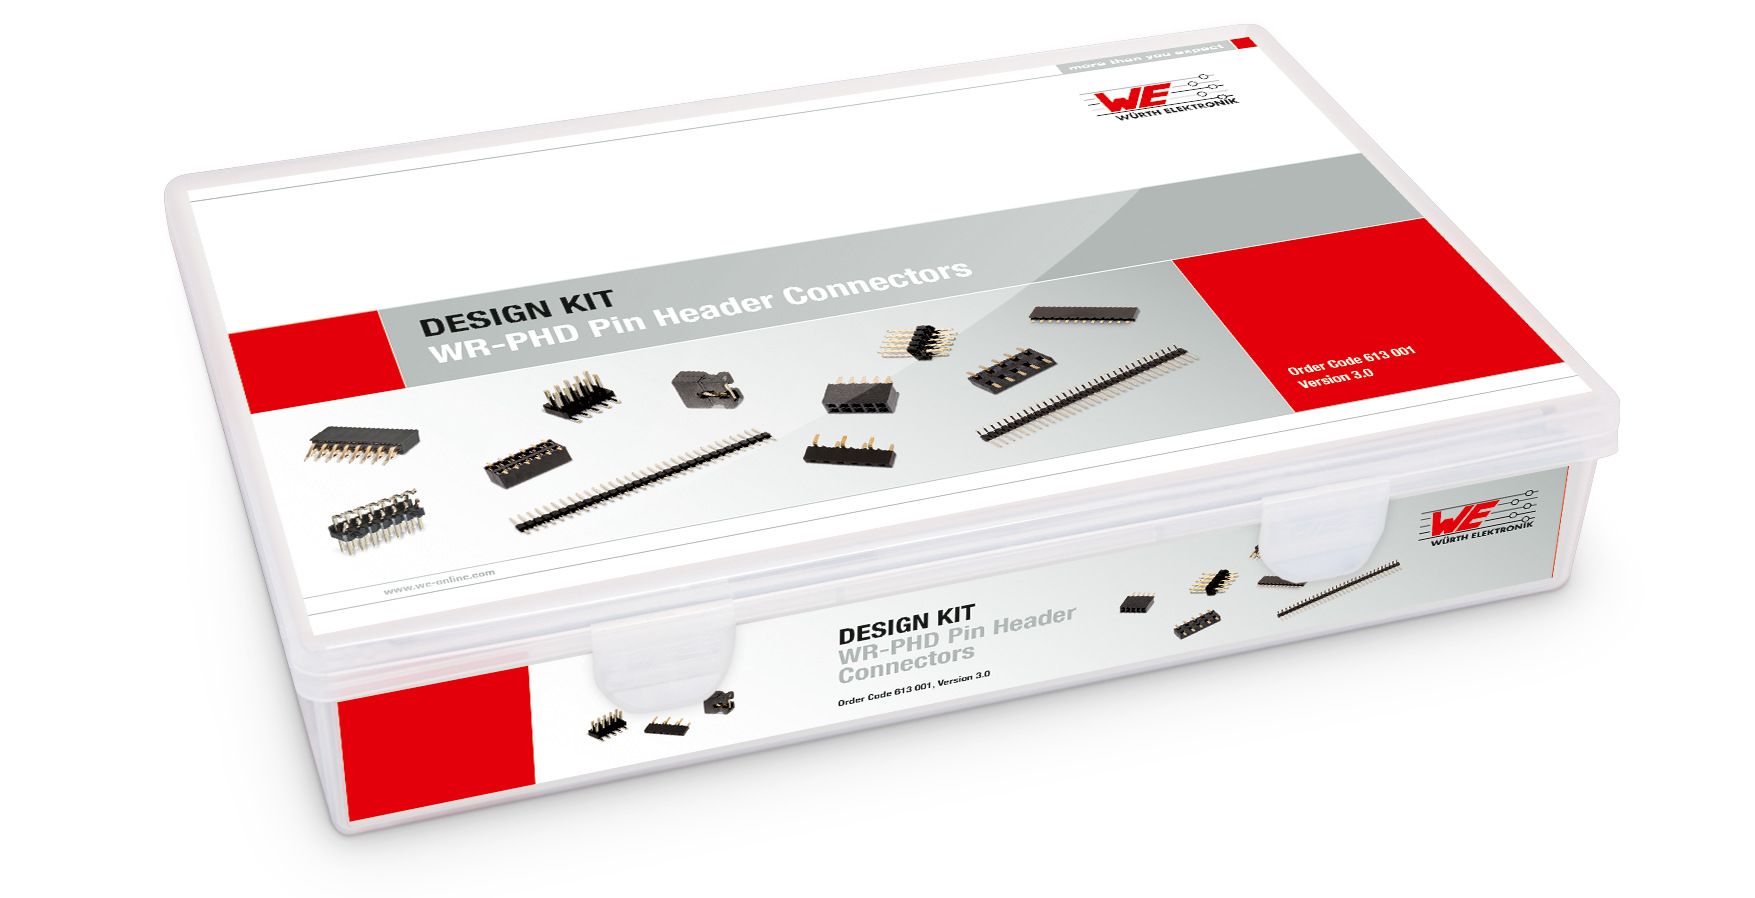 Connector Kit Containing Jumpers, Pin Headers, Socket Headers